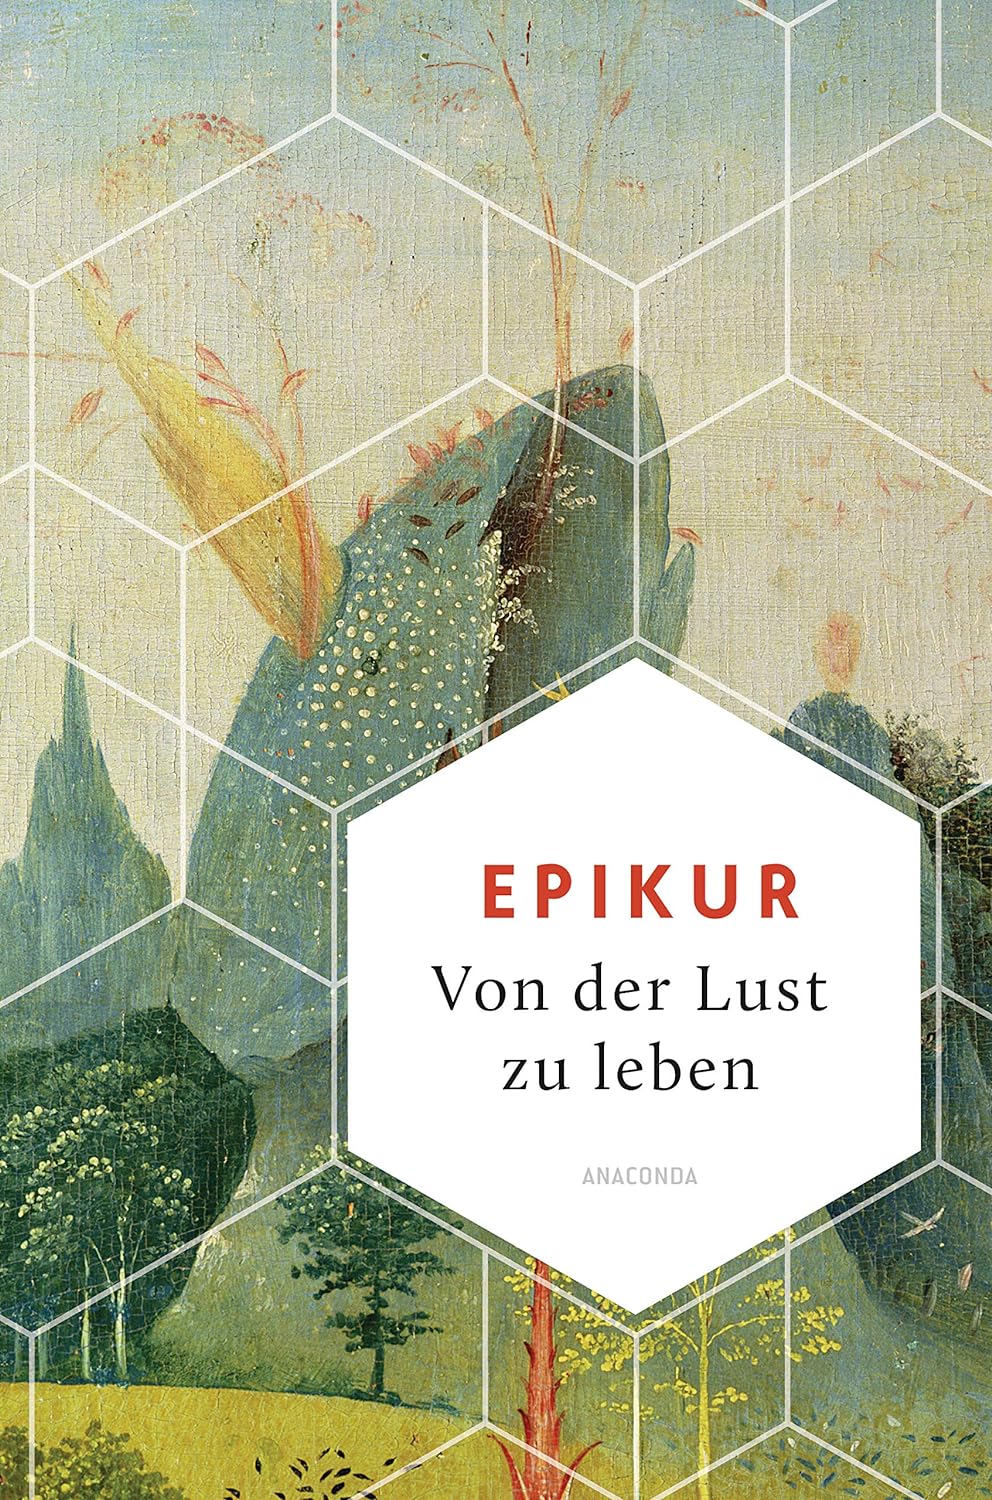 Book Epikur: From the desire to live